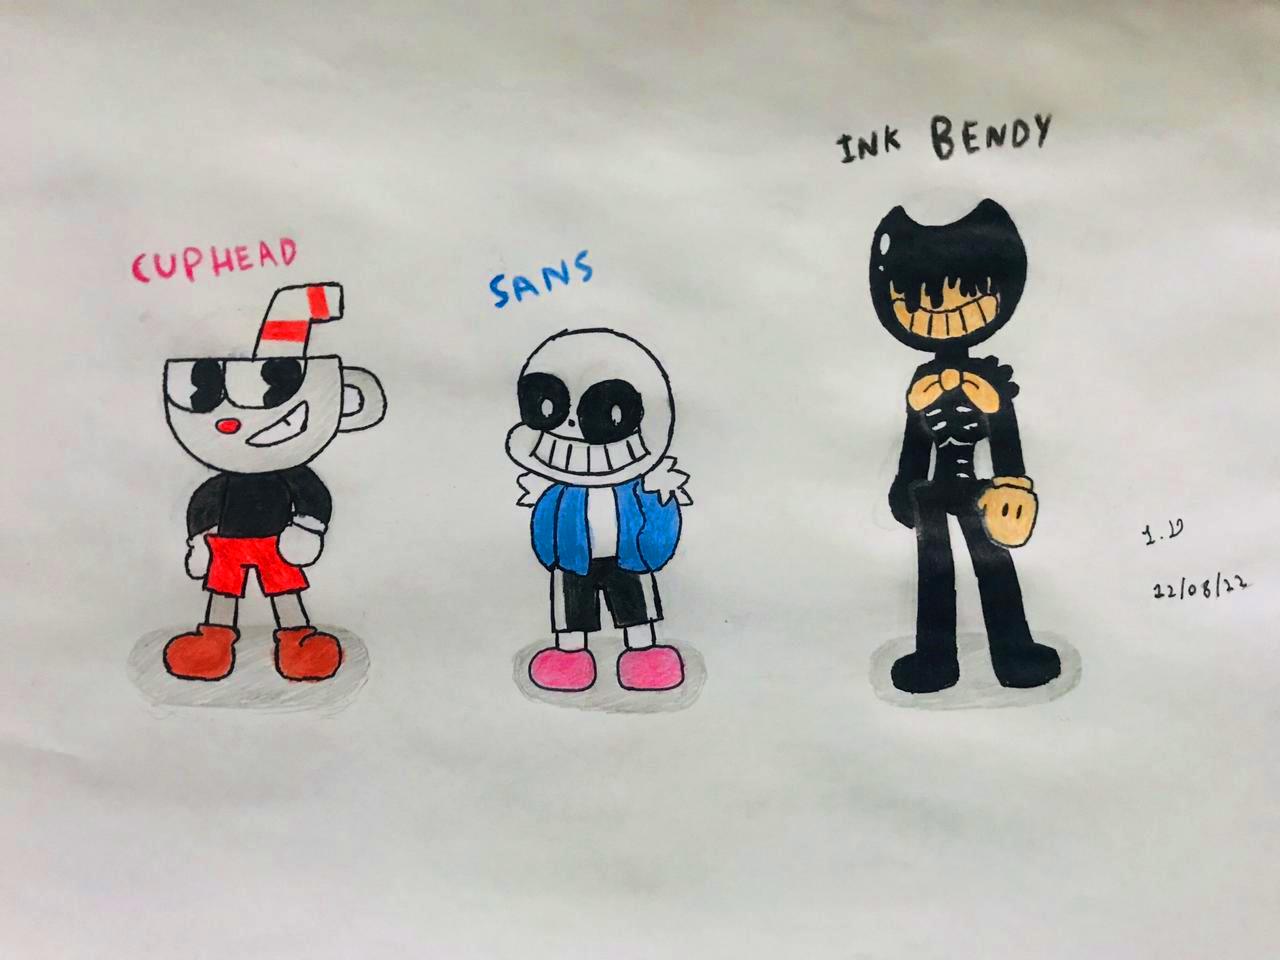 FNF Indie Cross Gang In Different Versions by mauricio2006 on DeviantArt